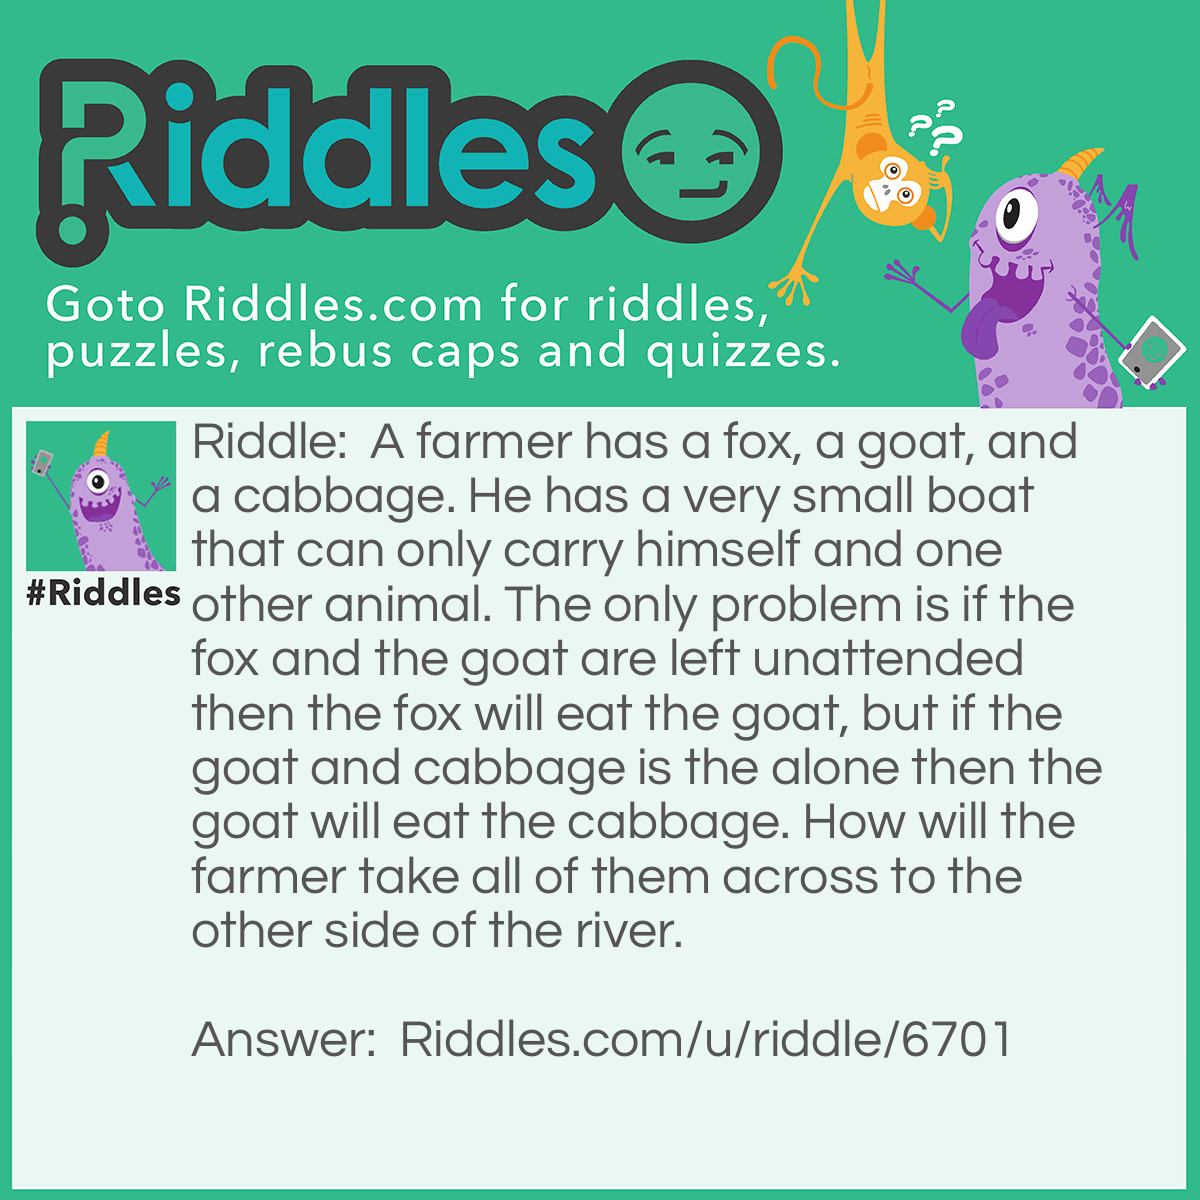 Riddle: A farmer has a fox, a goat, and a cabbage. He has a very small boat that can only carry himself and one other animal. The only problem is if the fox and the goat are left unattended then the fox will eat the goat, but if the goat and cabbage is the alone then the goat will eat the cabbage. How will the farmer take all of them across to the other side of the river. Answer: The farmer should take the goat across first then come back for the cabbage. When he gets to the other side with the cabbage he should leave the cabbage and take the goat back. After getting to the original side with the goat he should leave the goat and take the fox. When he crosses the river with the fox he leaves it with the cabbage and returns for the goat. When he arrives with the goat they all live happily ever after.